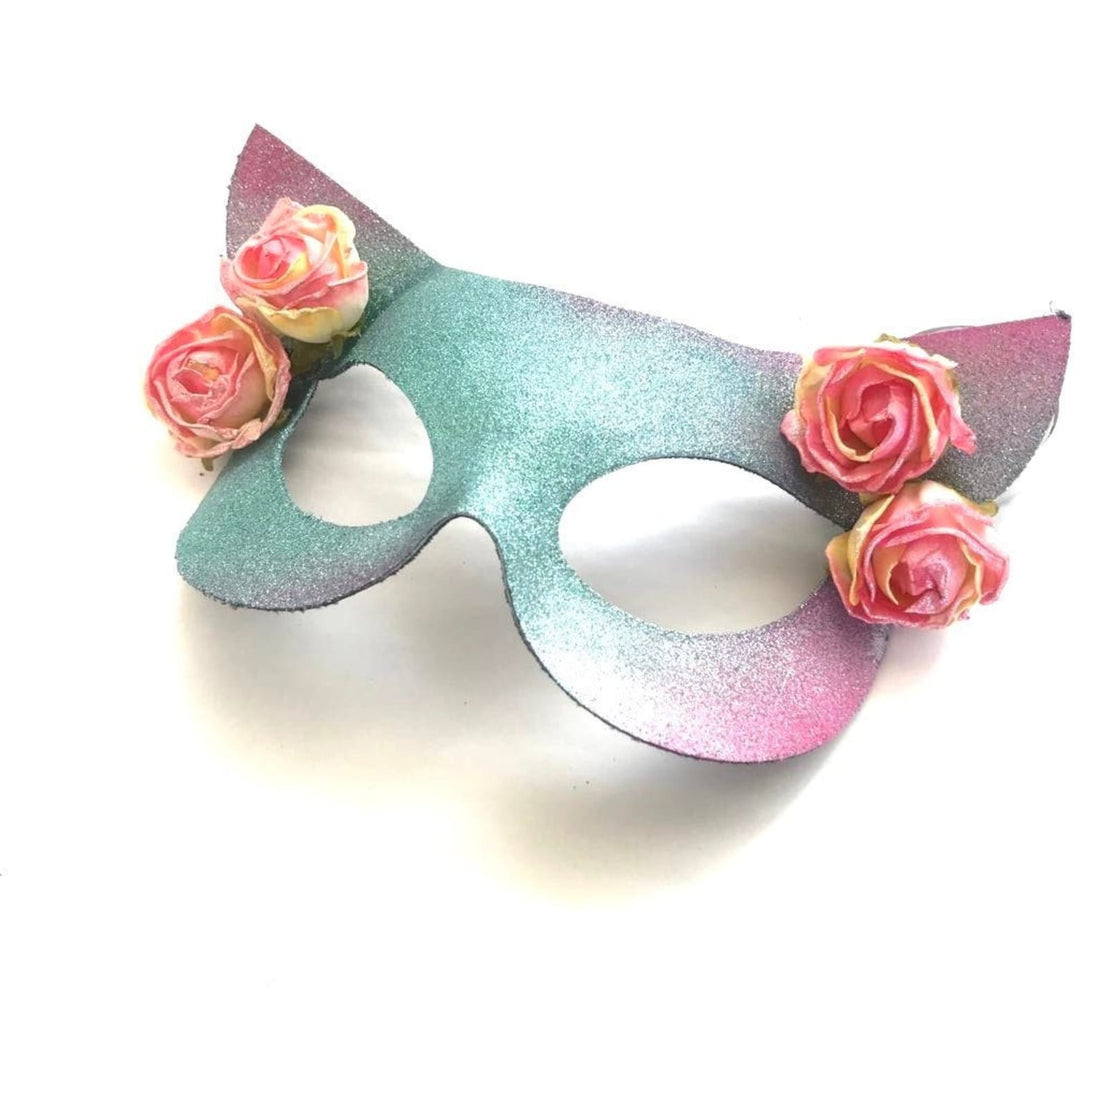 Cat masquerade mask for kids in blue and pink with pink roses.